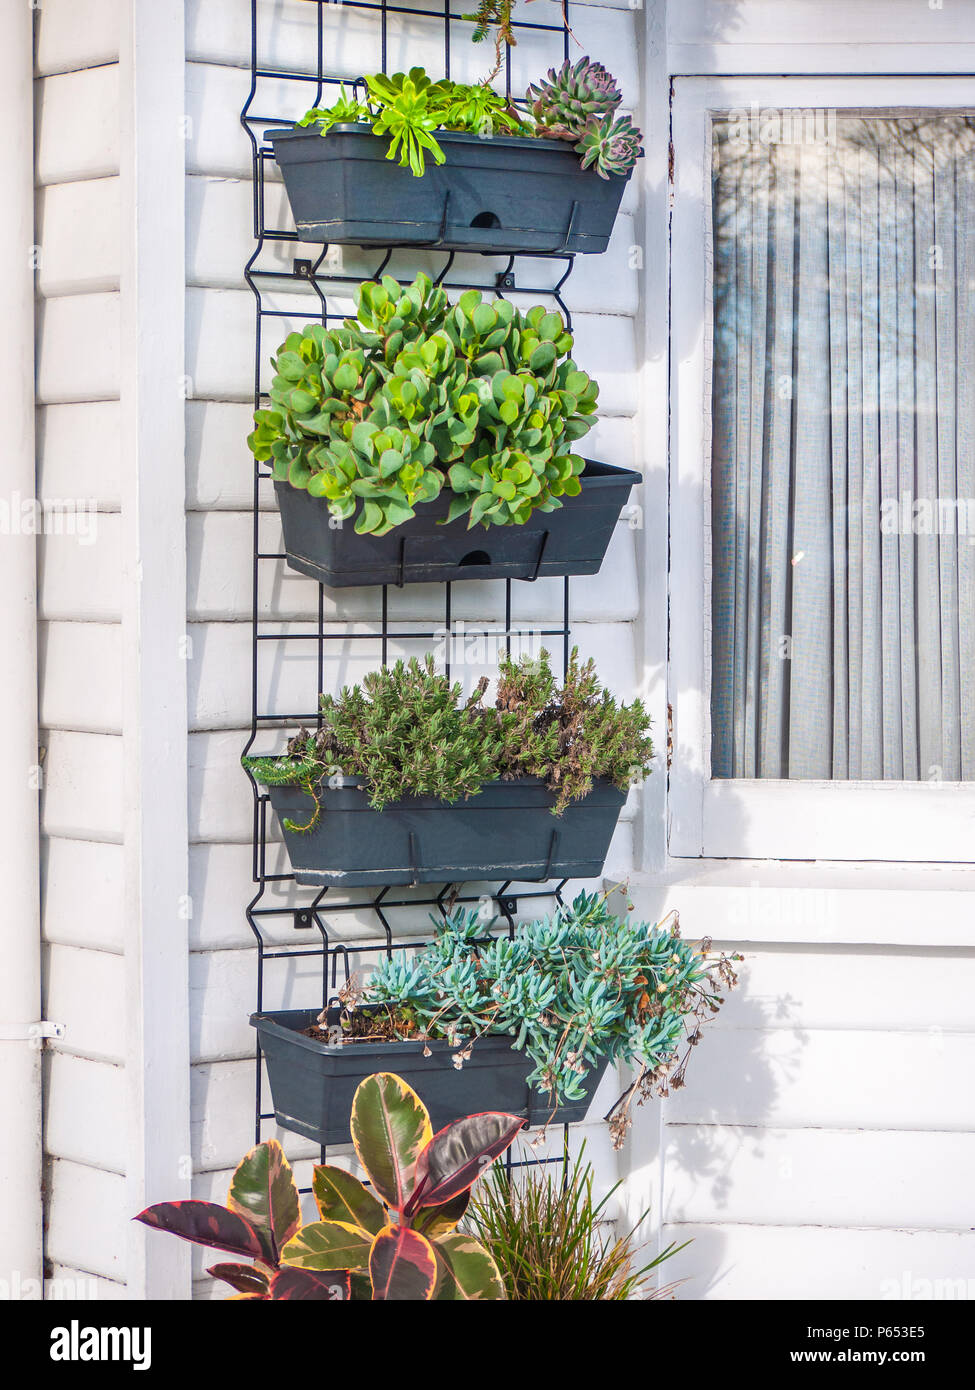 Decorative vertical garden on wall of white wooden house. Stock Photo